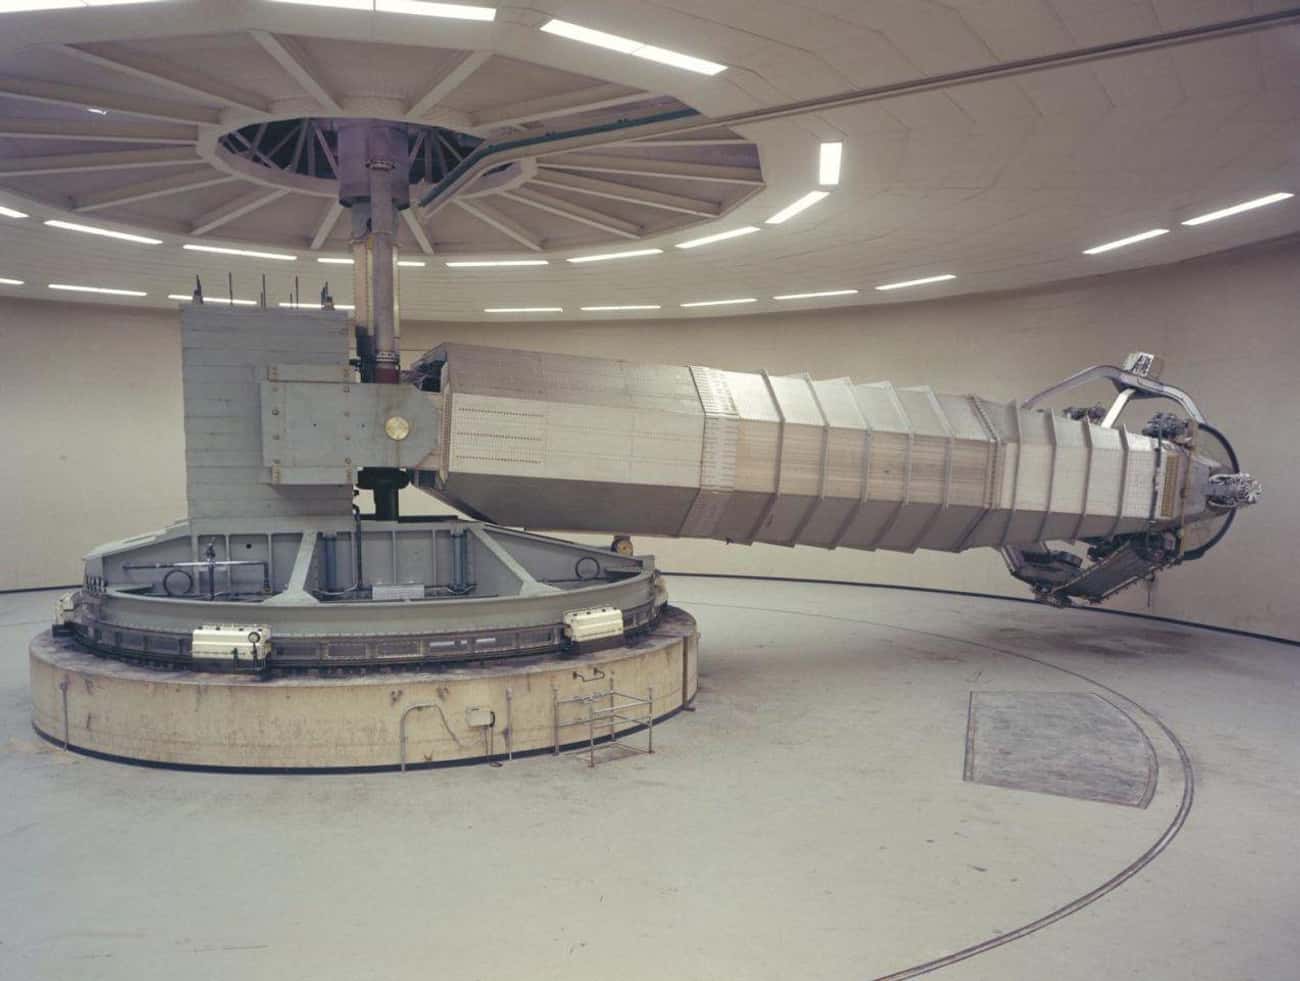 Centrifuges Spun Test Subjects Around Until They Perished